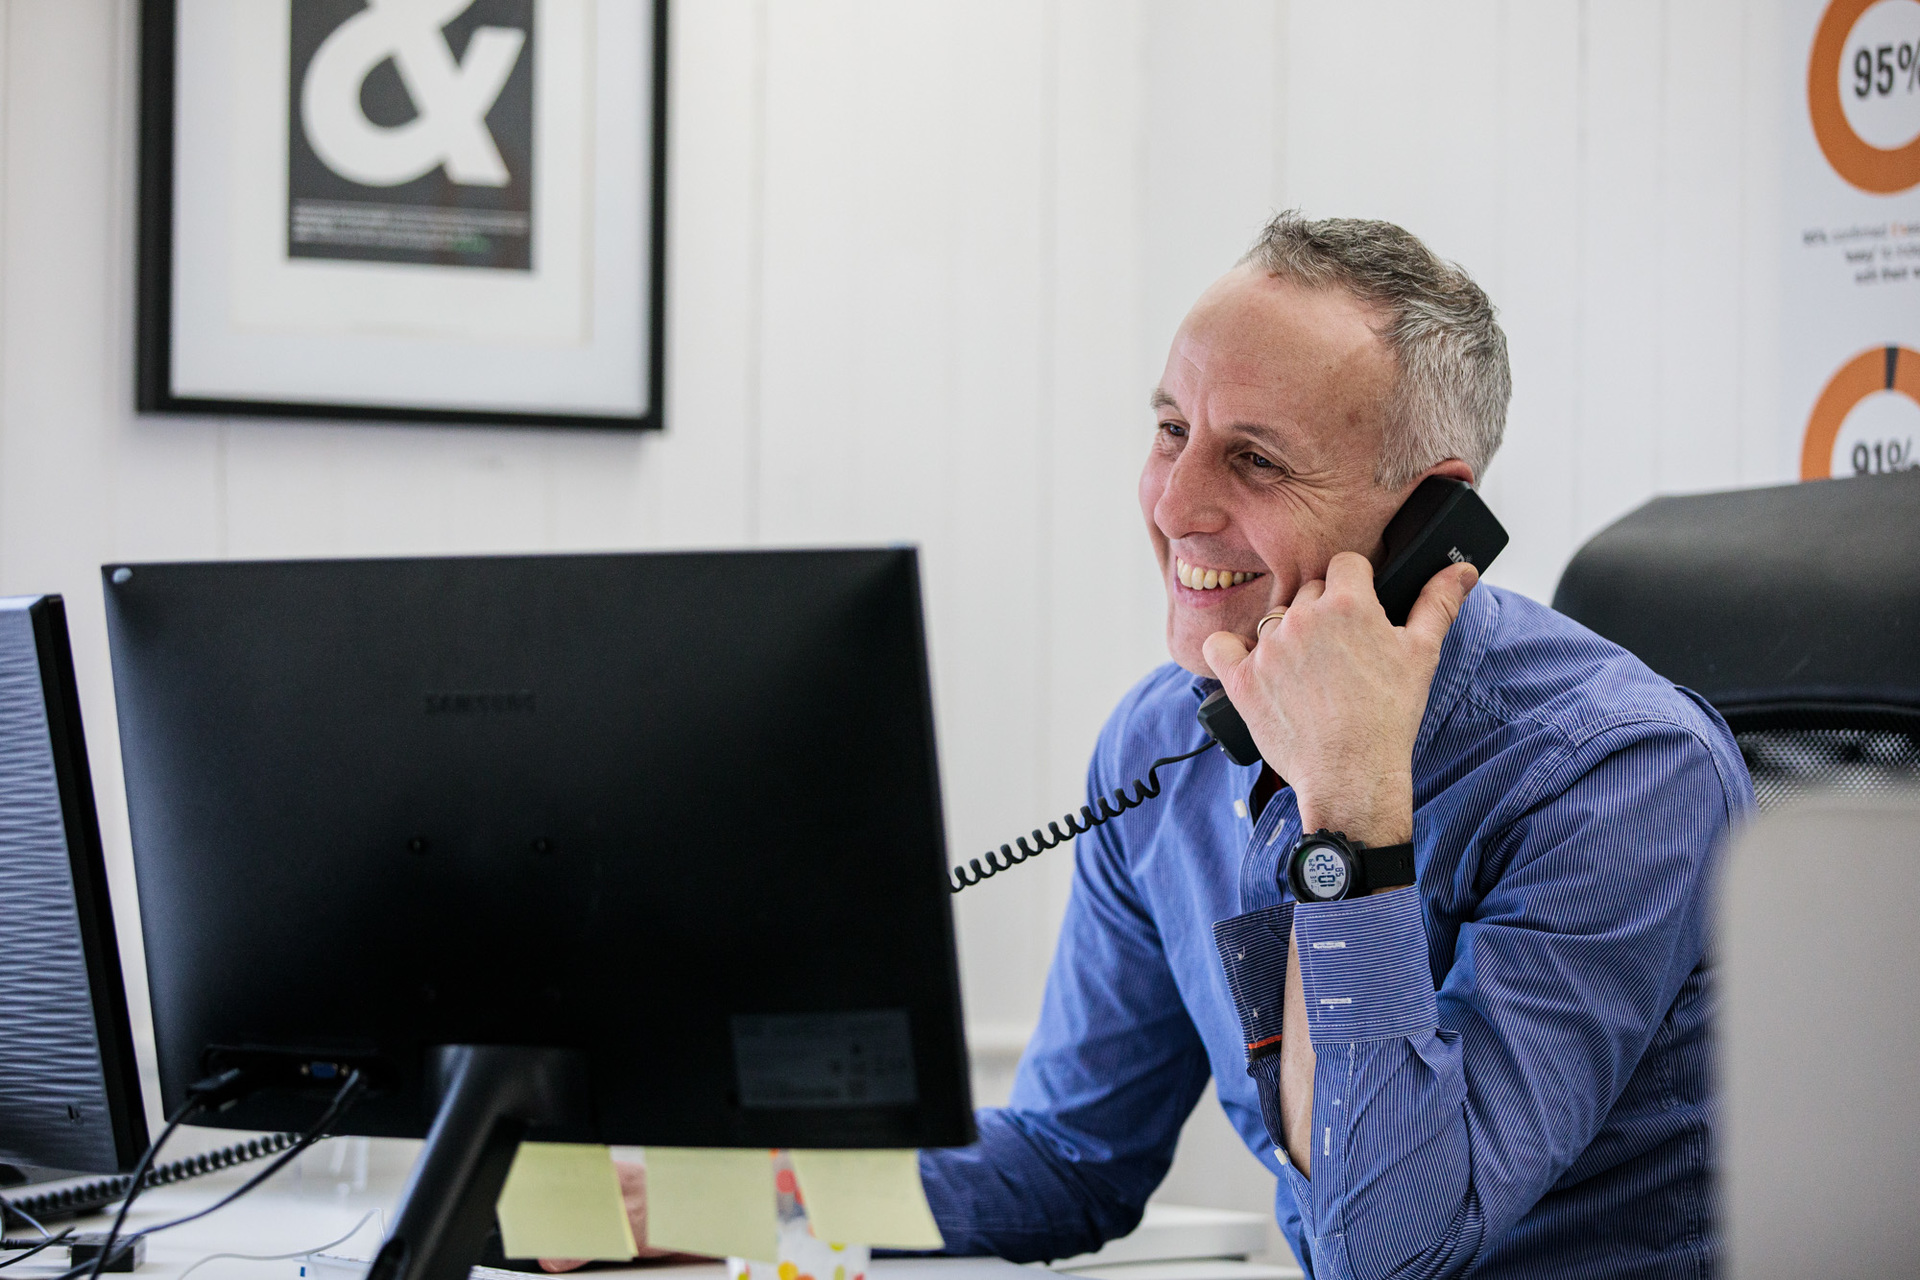 A man sat at a desk, on the phone smiling.